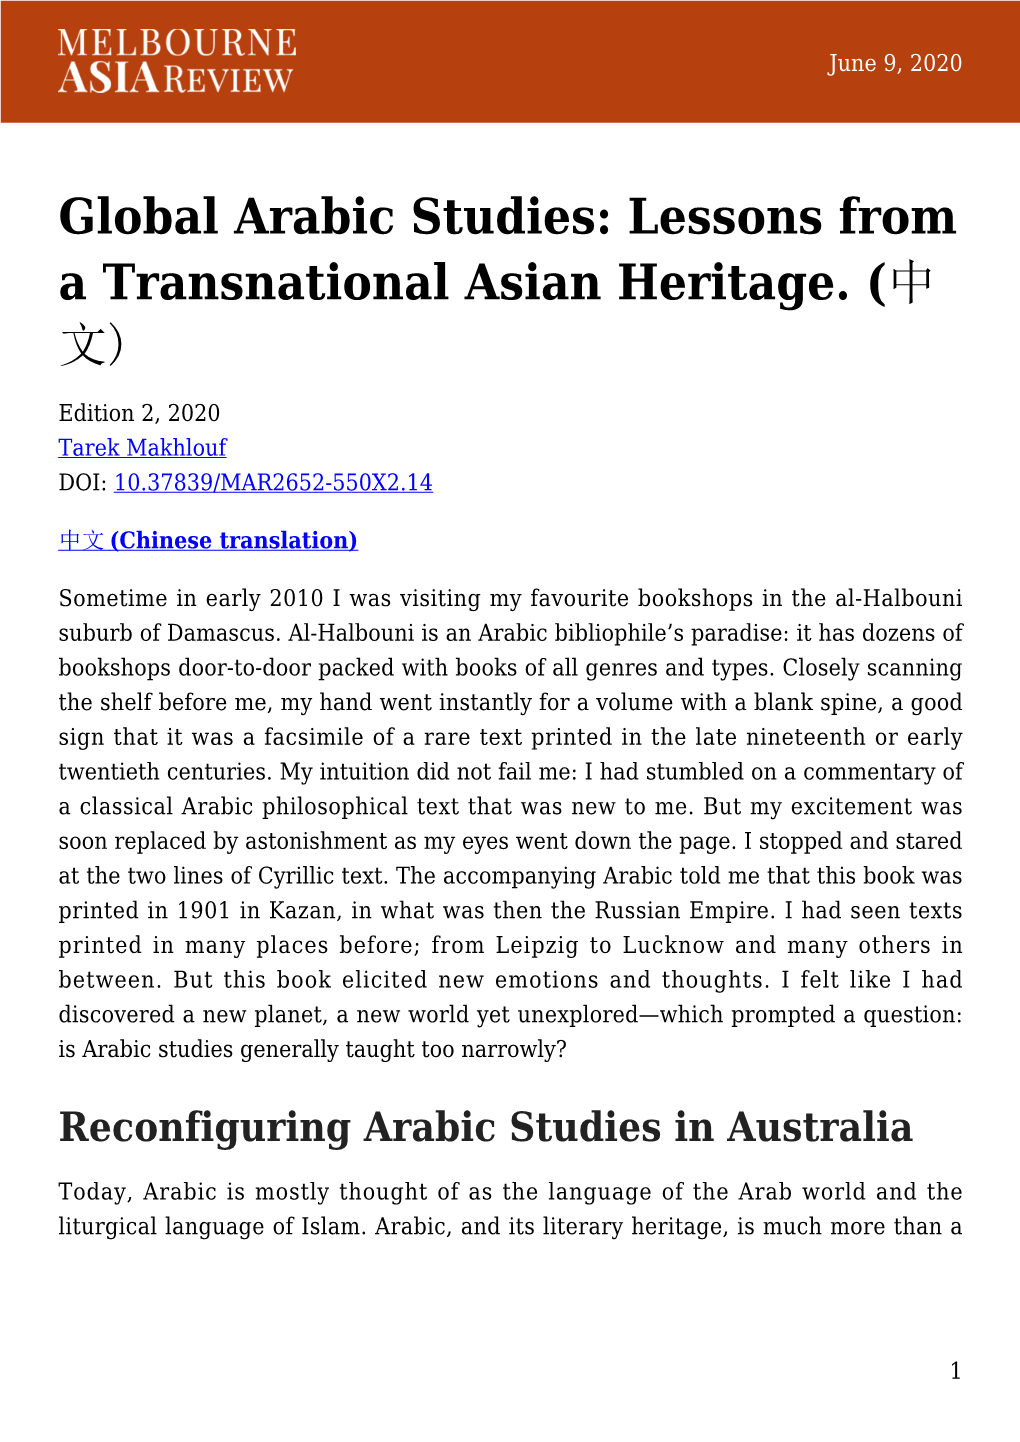 Global Arabic Studies: Lessons from a Transnational Asian Heritage